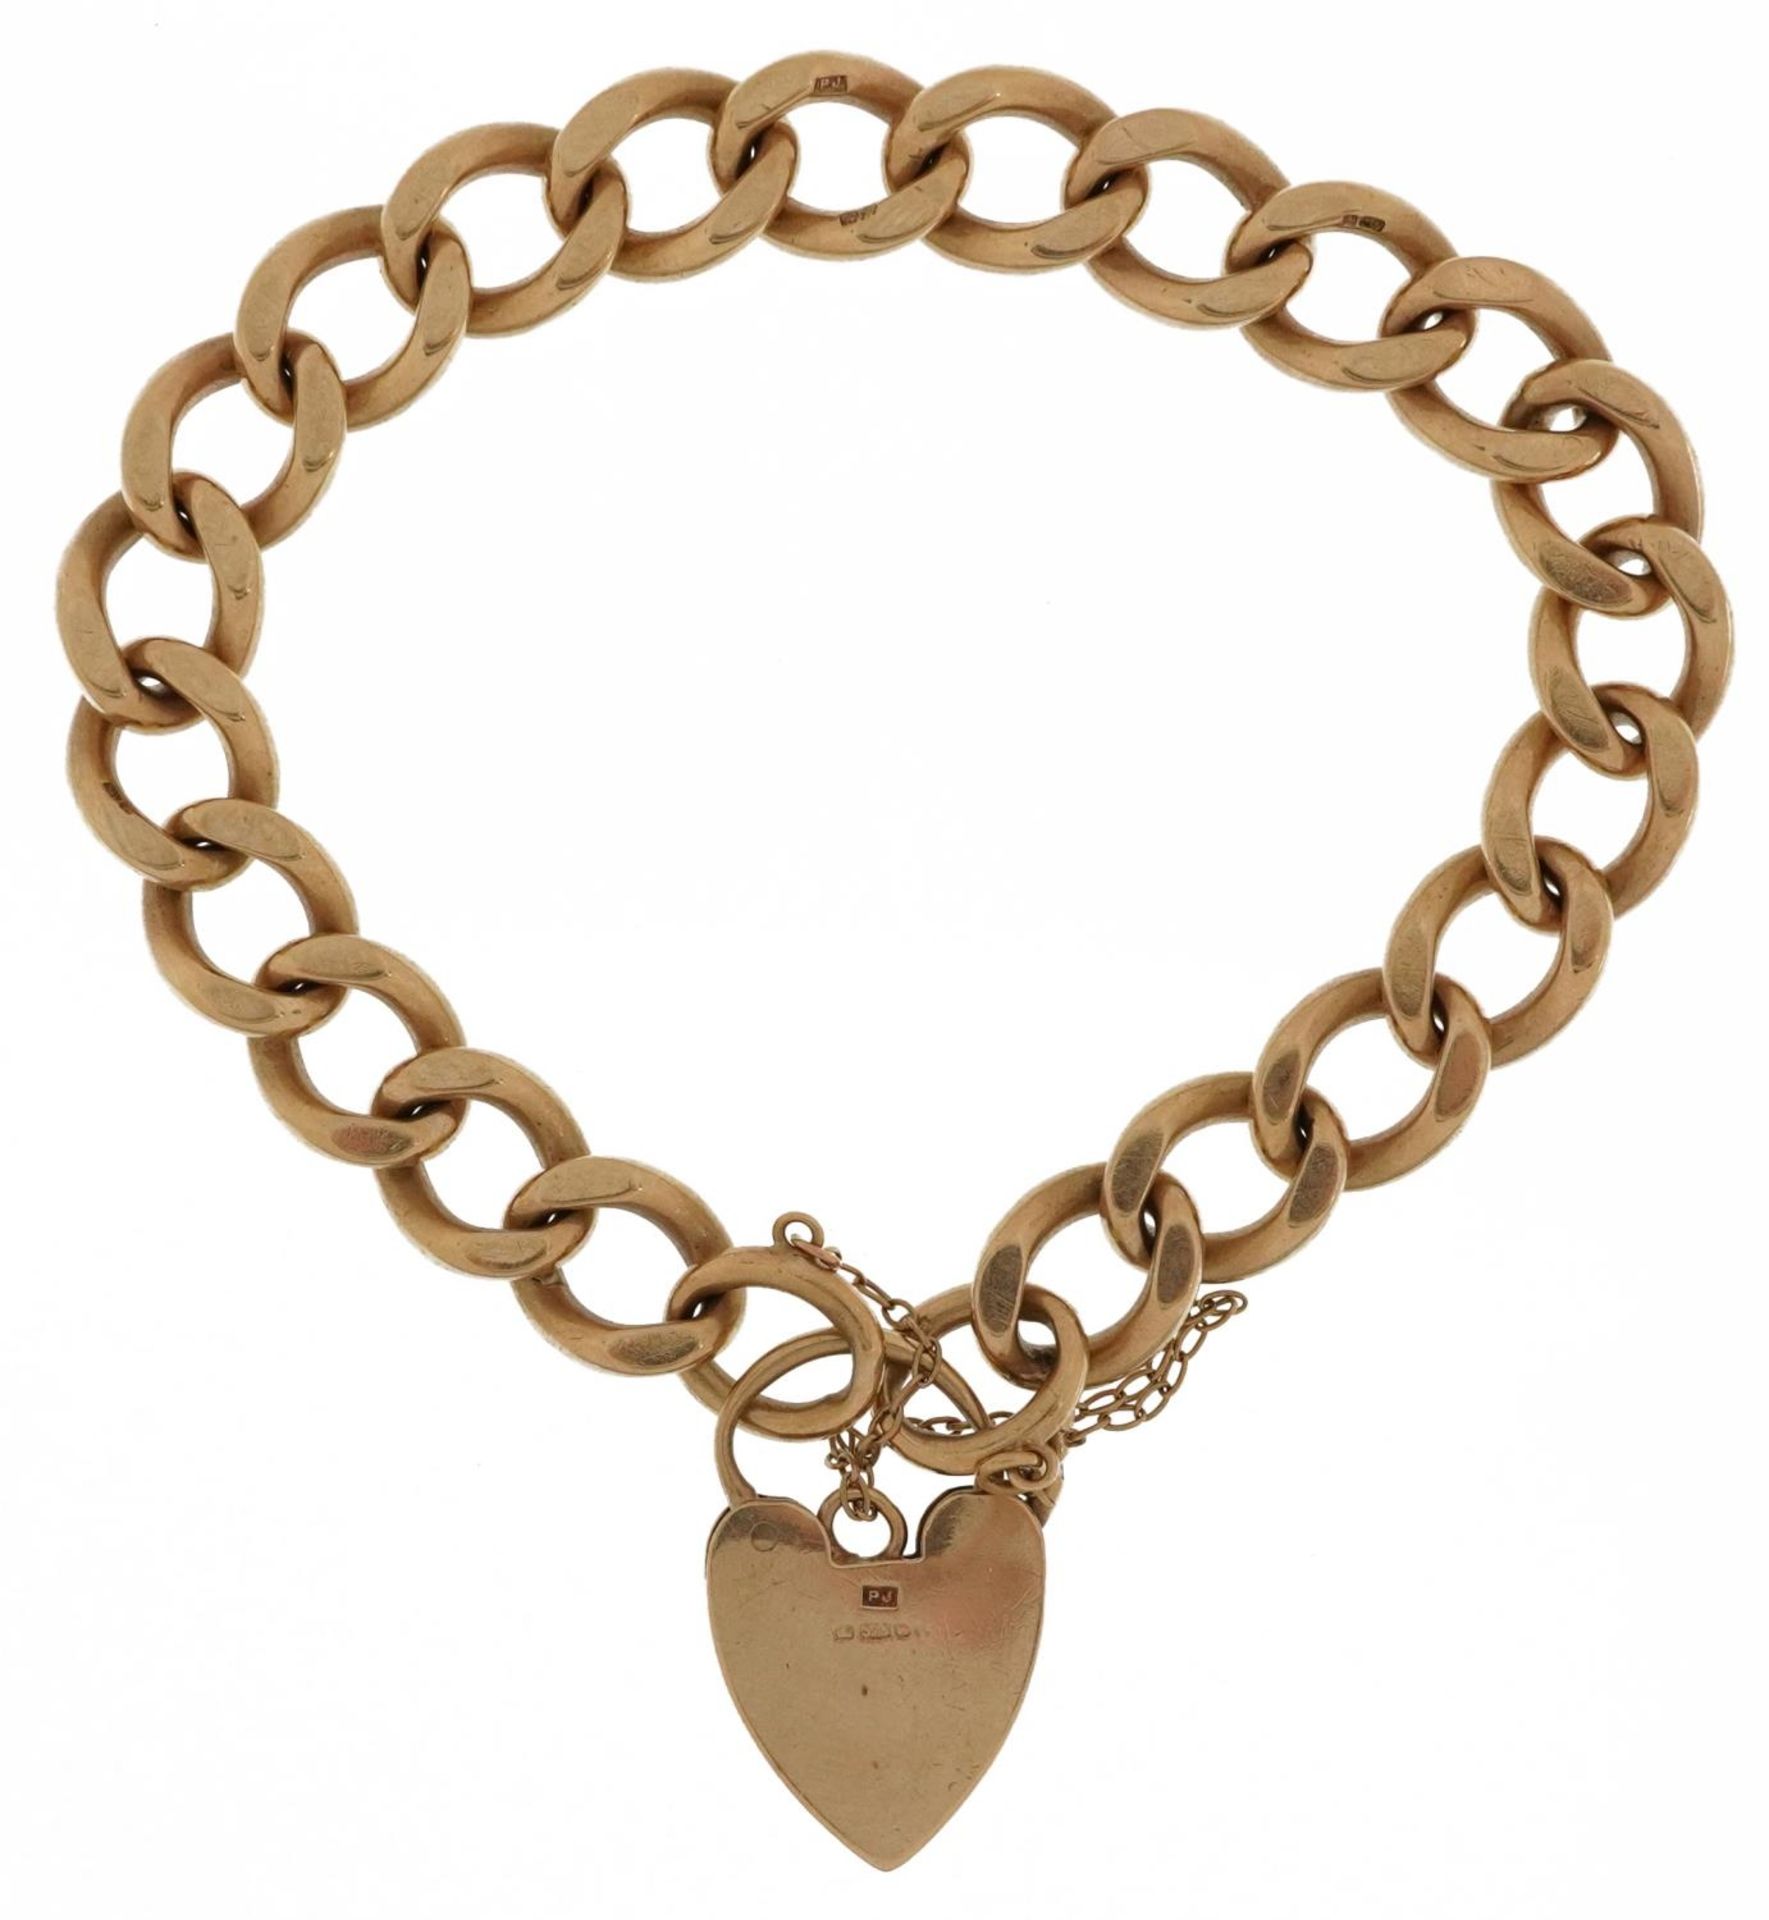 9ct gold engraved curb link charm bracelet with 9ct gold love heart padlock, 20cm in length, 40.0g - Image 2 of 3